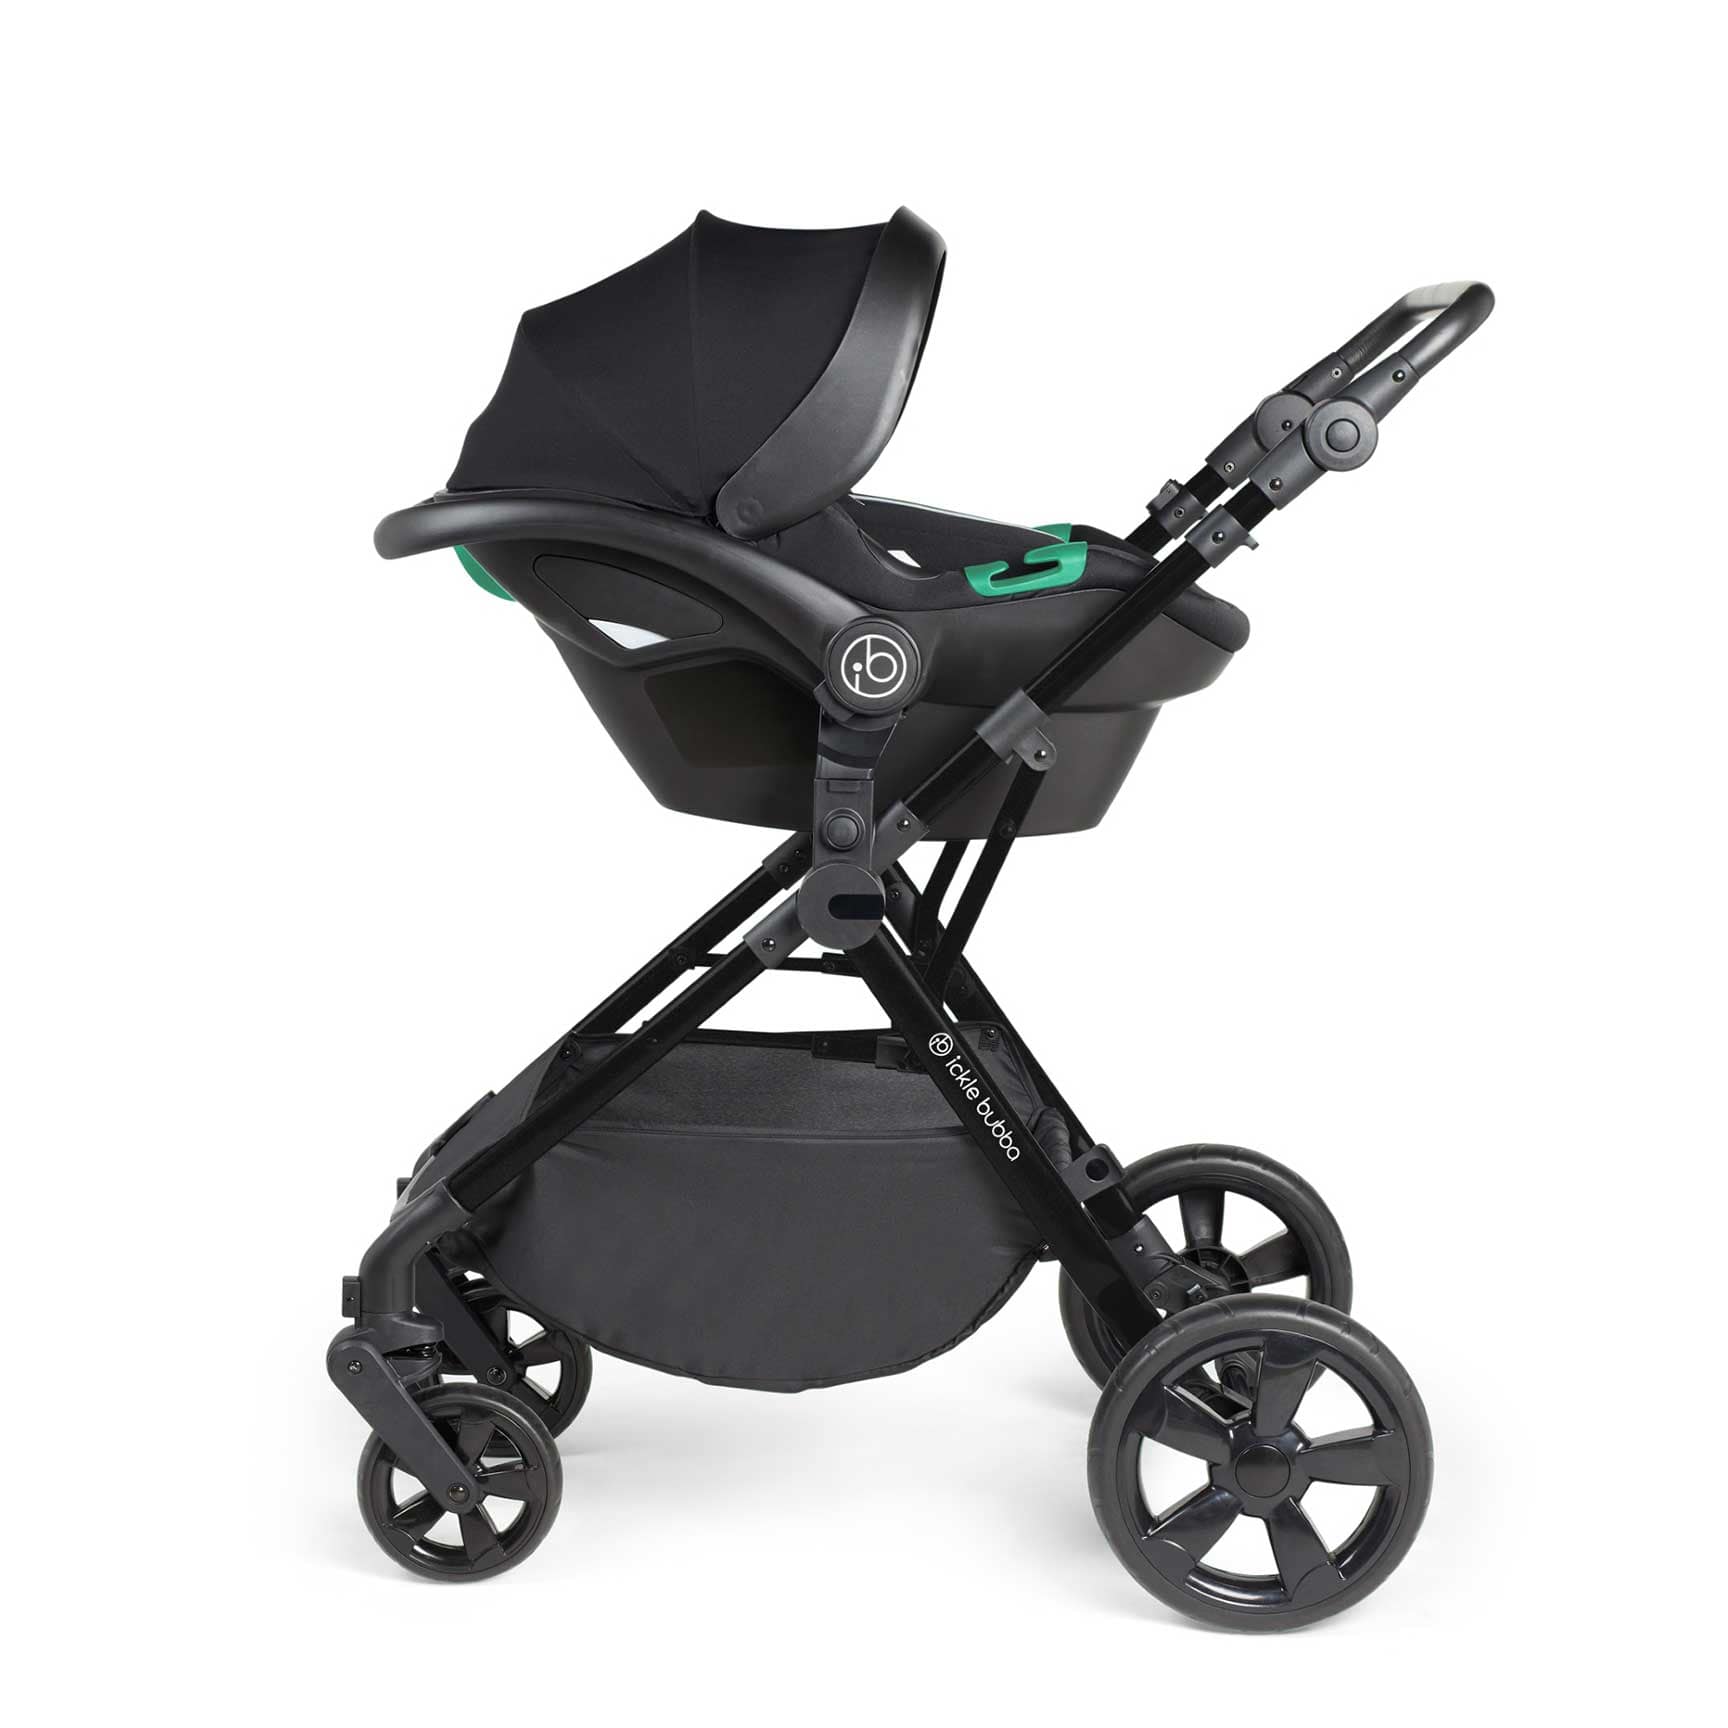 Ickle Bubba baby prams Ickle Bubba Comet 3-in-1 Travel System with Astral Car Seat - Black